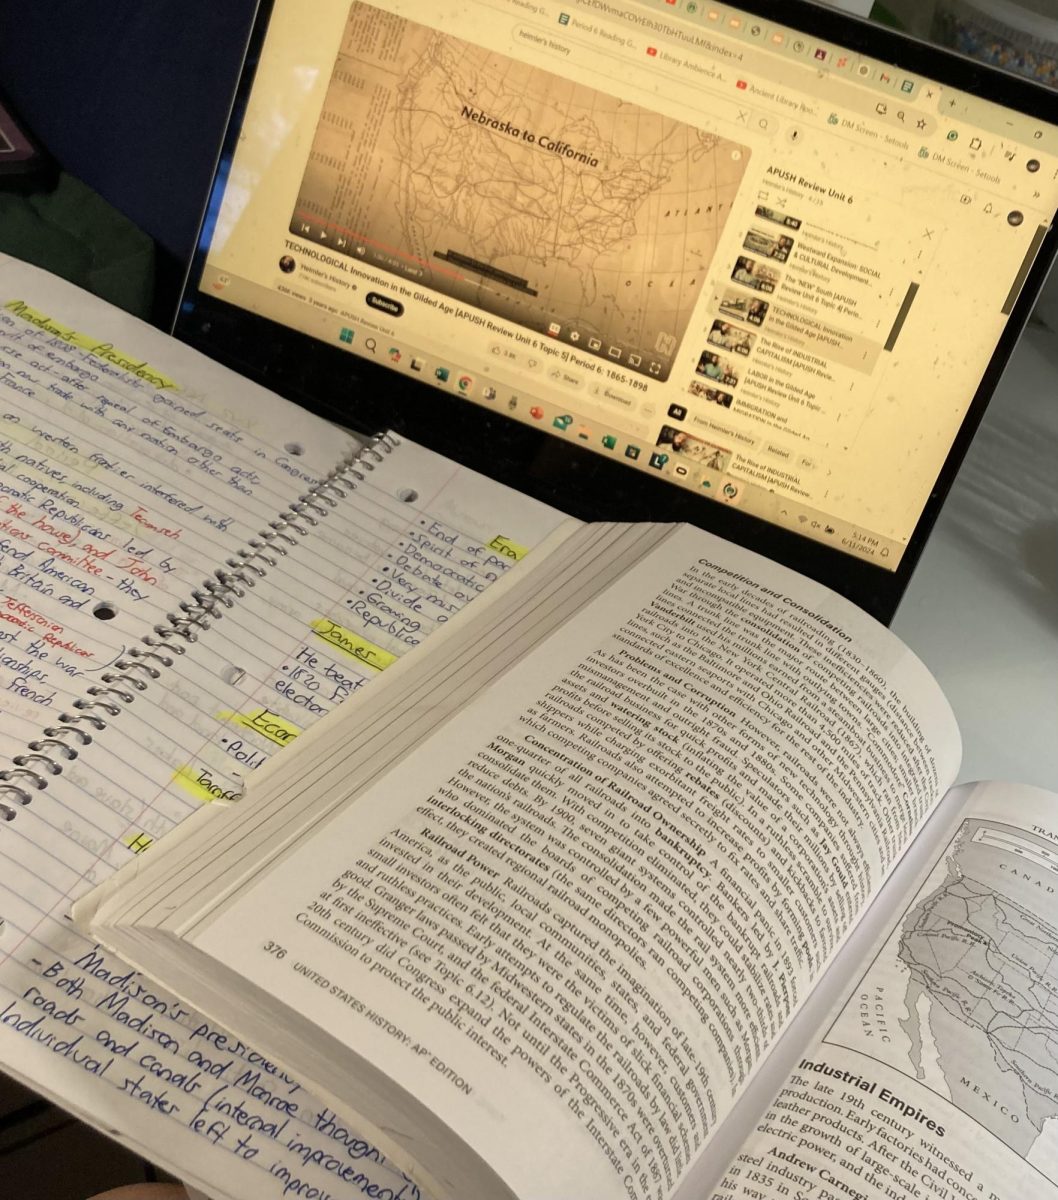 As finals come up, people look through their notes and textbooks from earlier in the year. Saving notes from previous units is one of the best ways you can prepare yourself for finals.